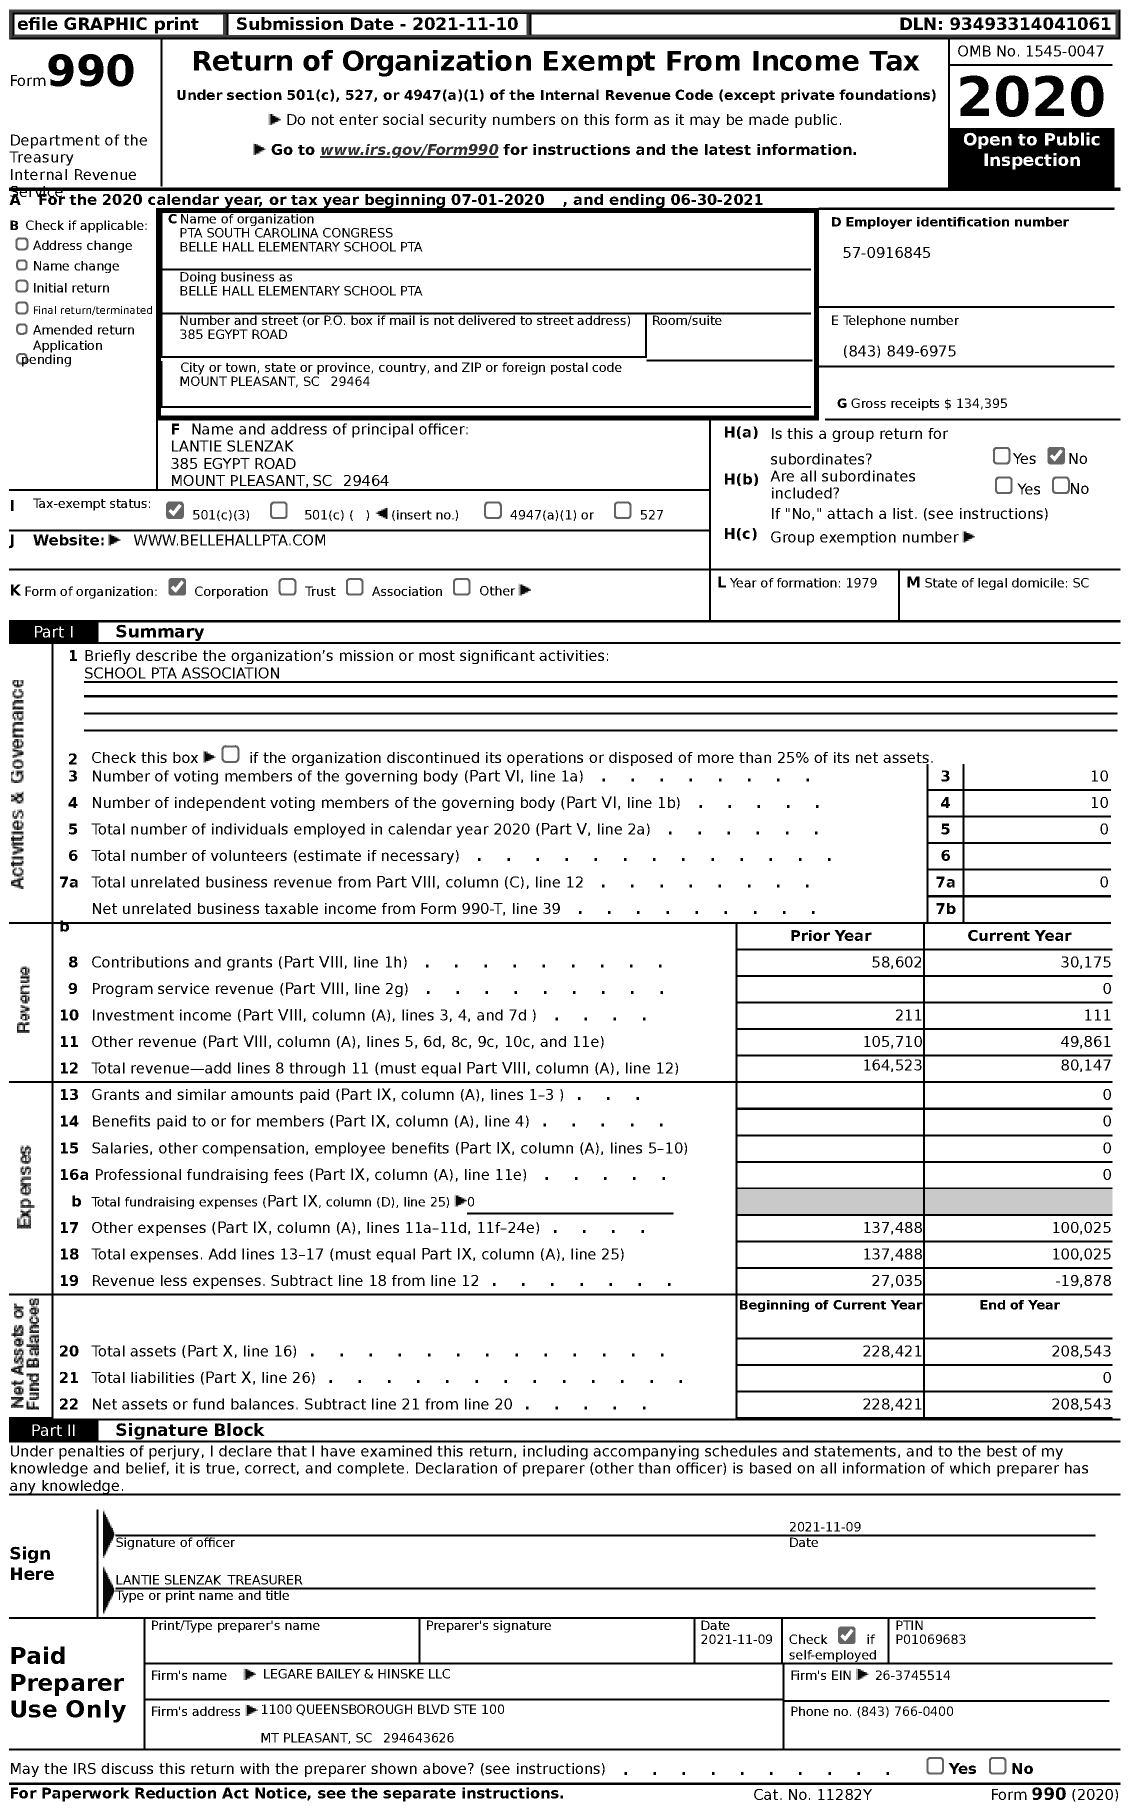 Image of first page of 2020 Form 990 for PTA South Carolina Congress Belle Hall Elementary School PTA